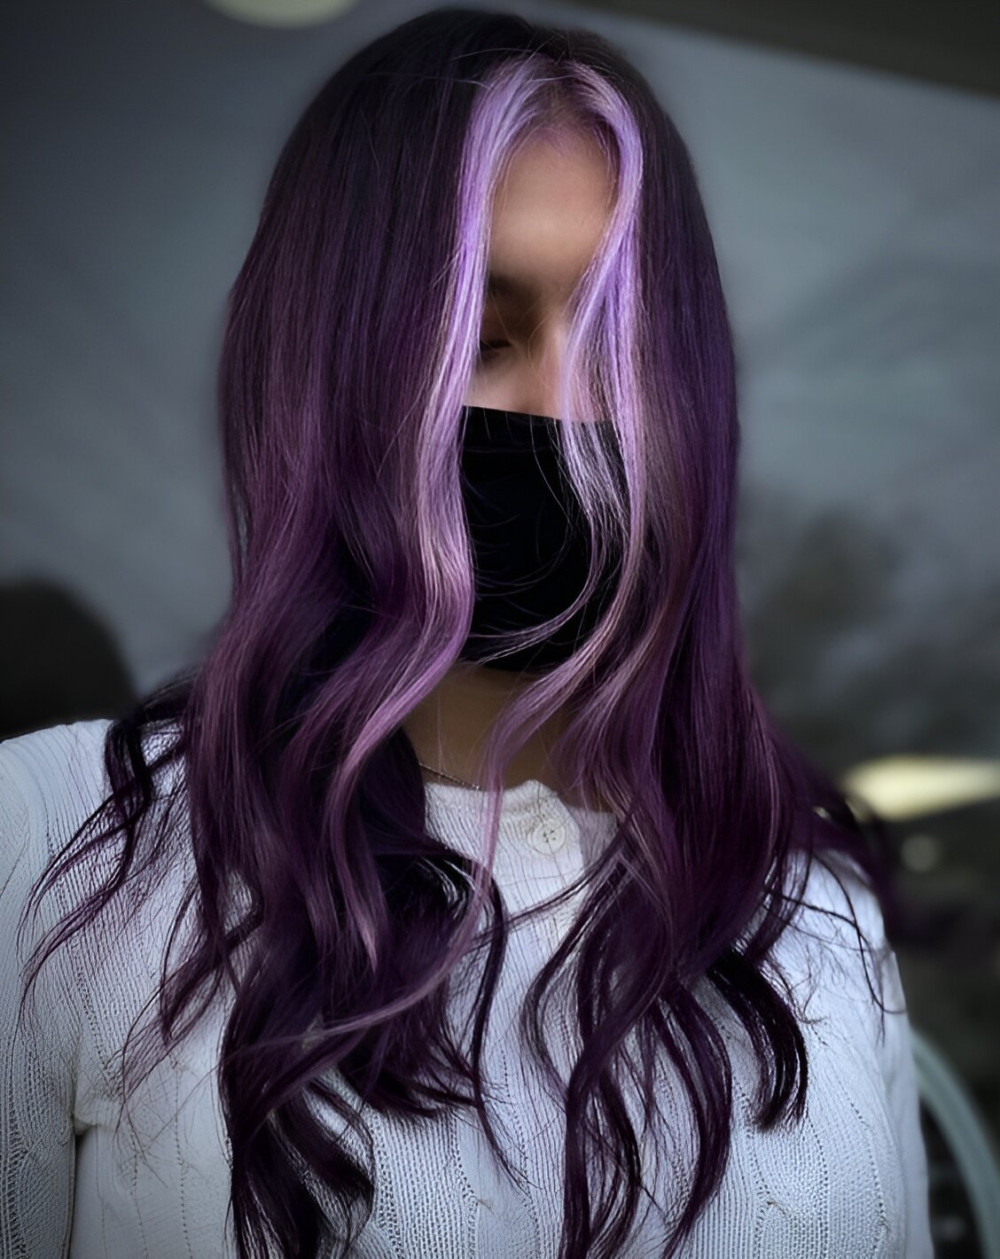 Become A Model With These 27 Gorgeous Plum Hair Color Ideas - 187